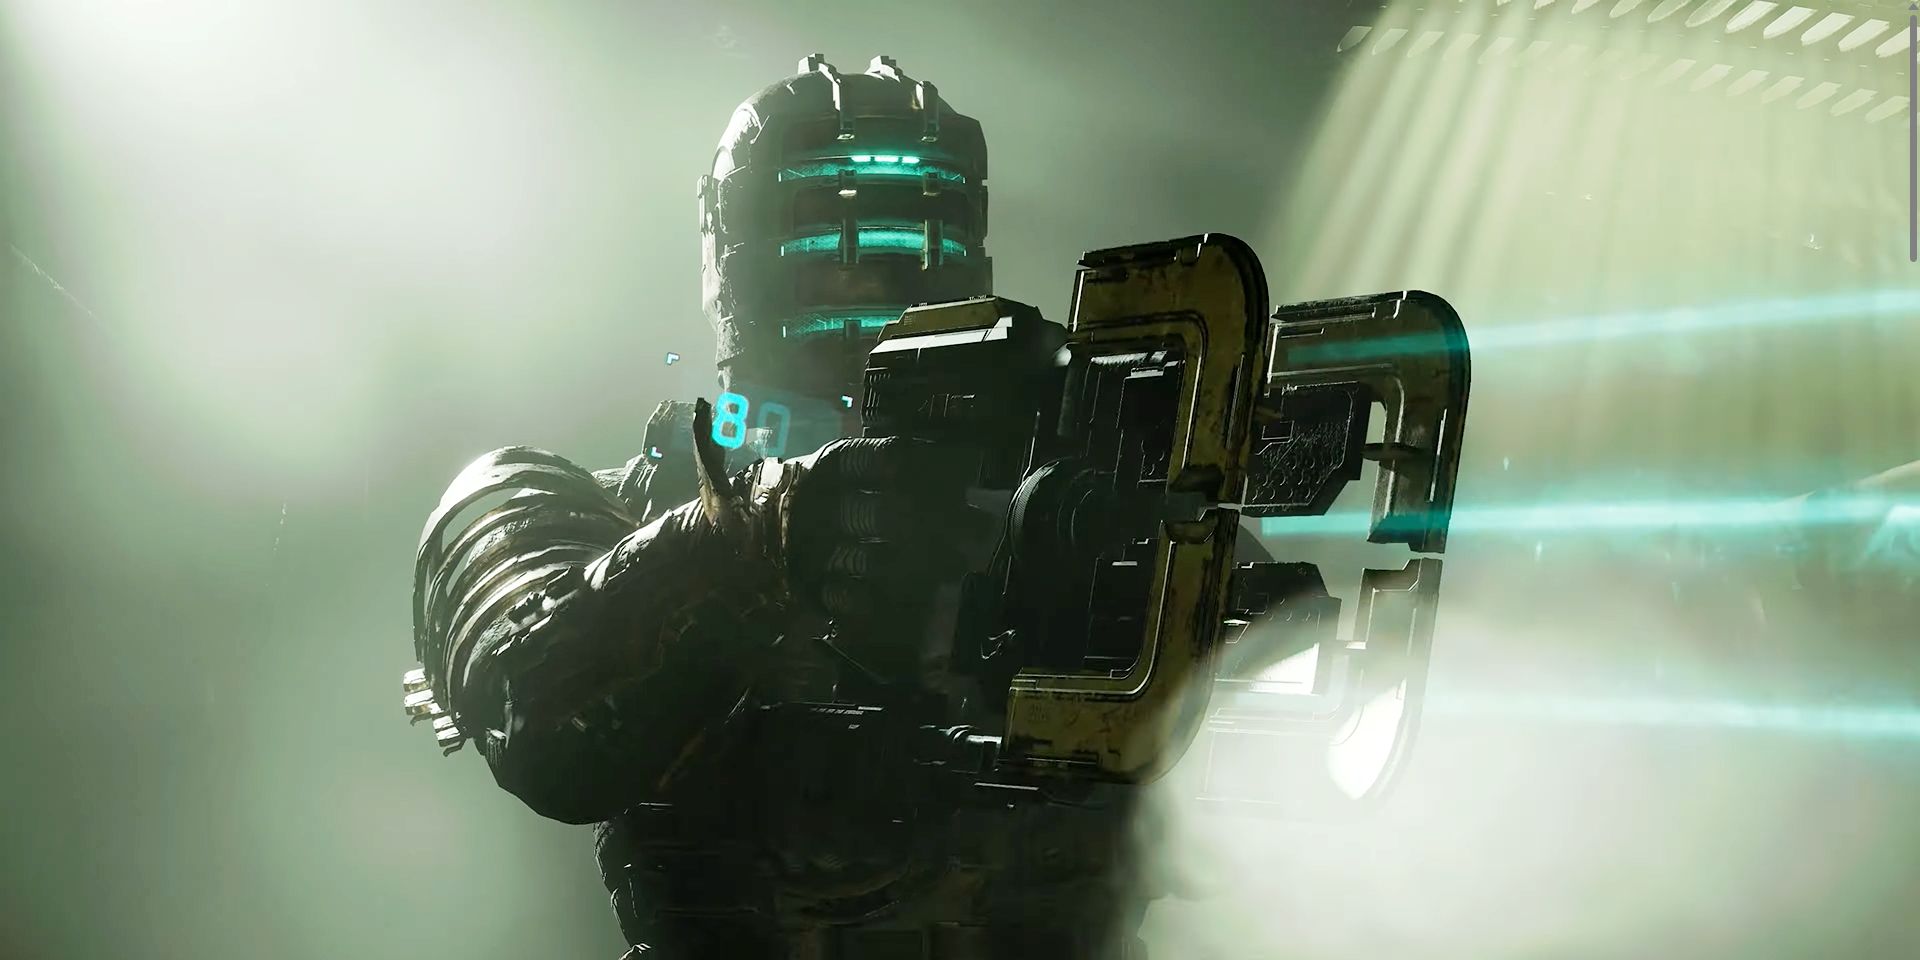 10 Original Dead Space Features That Still Hold Up In The Remake